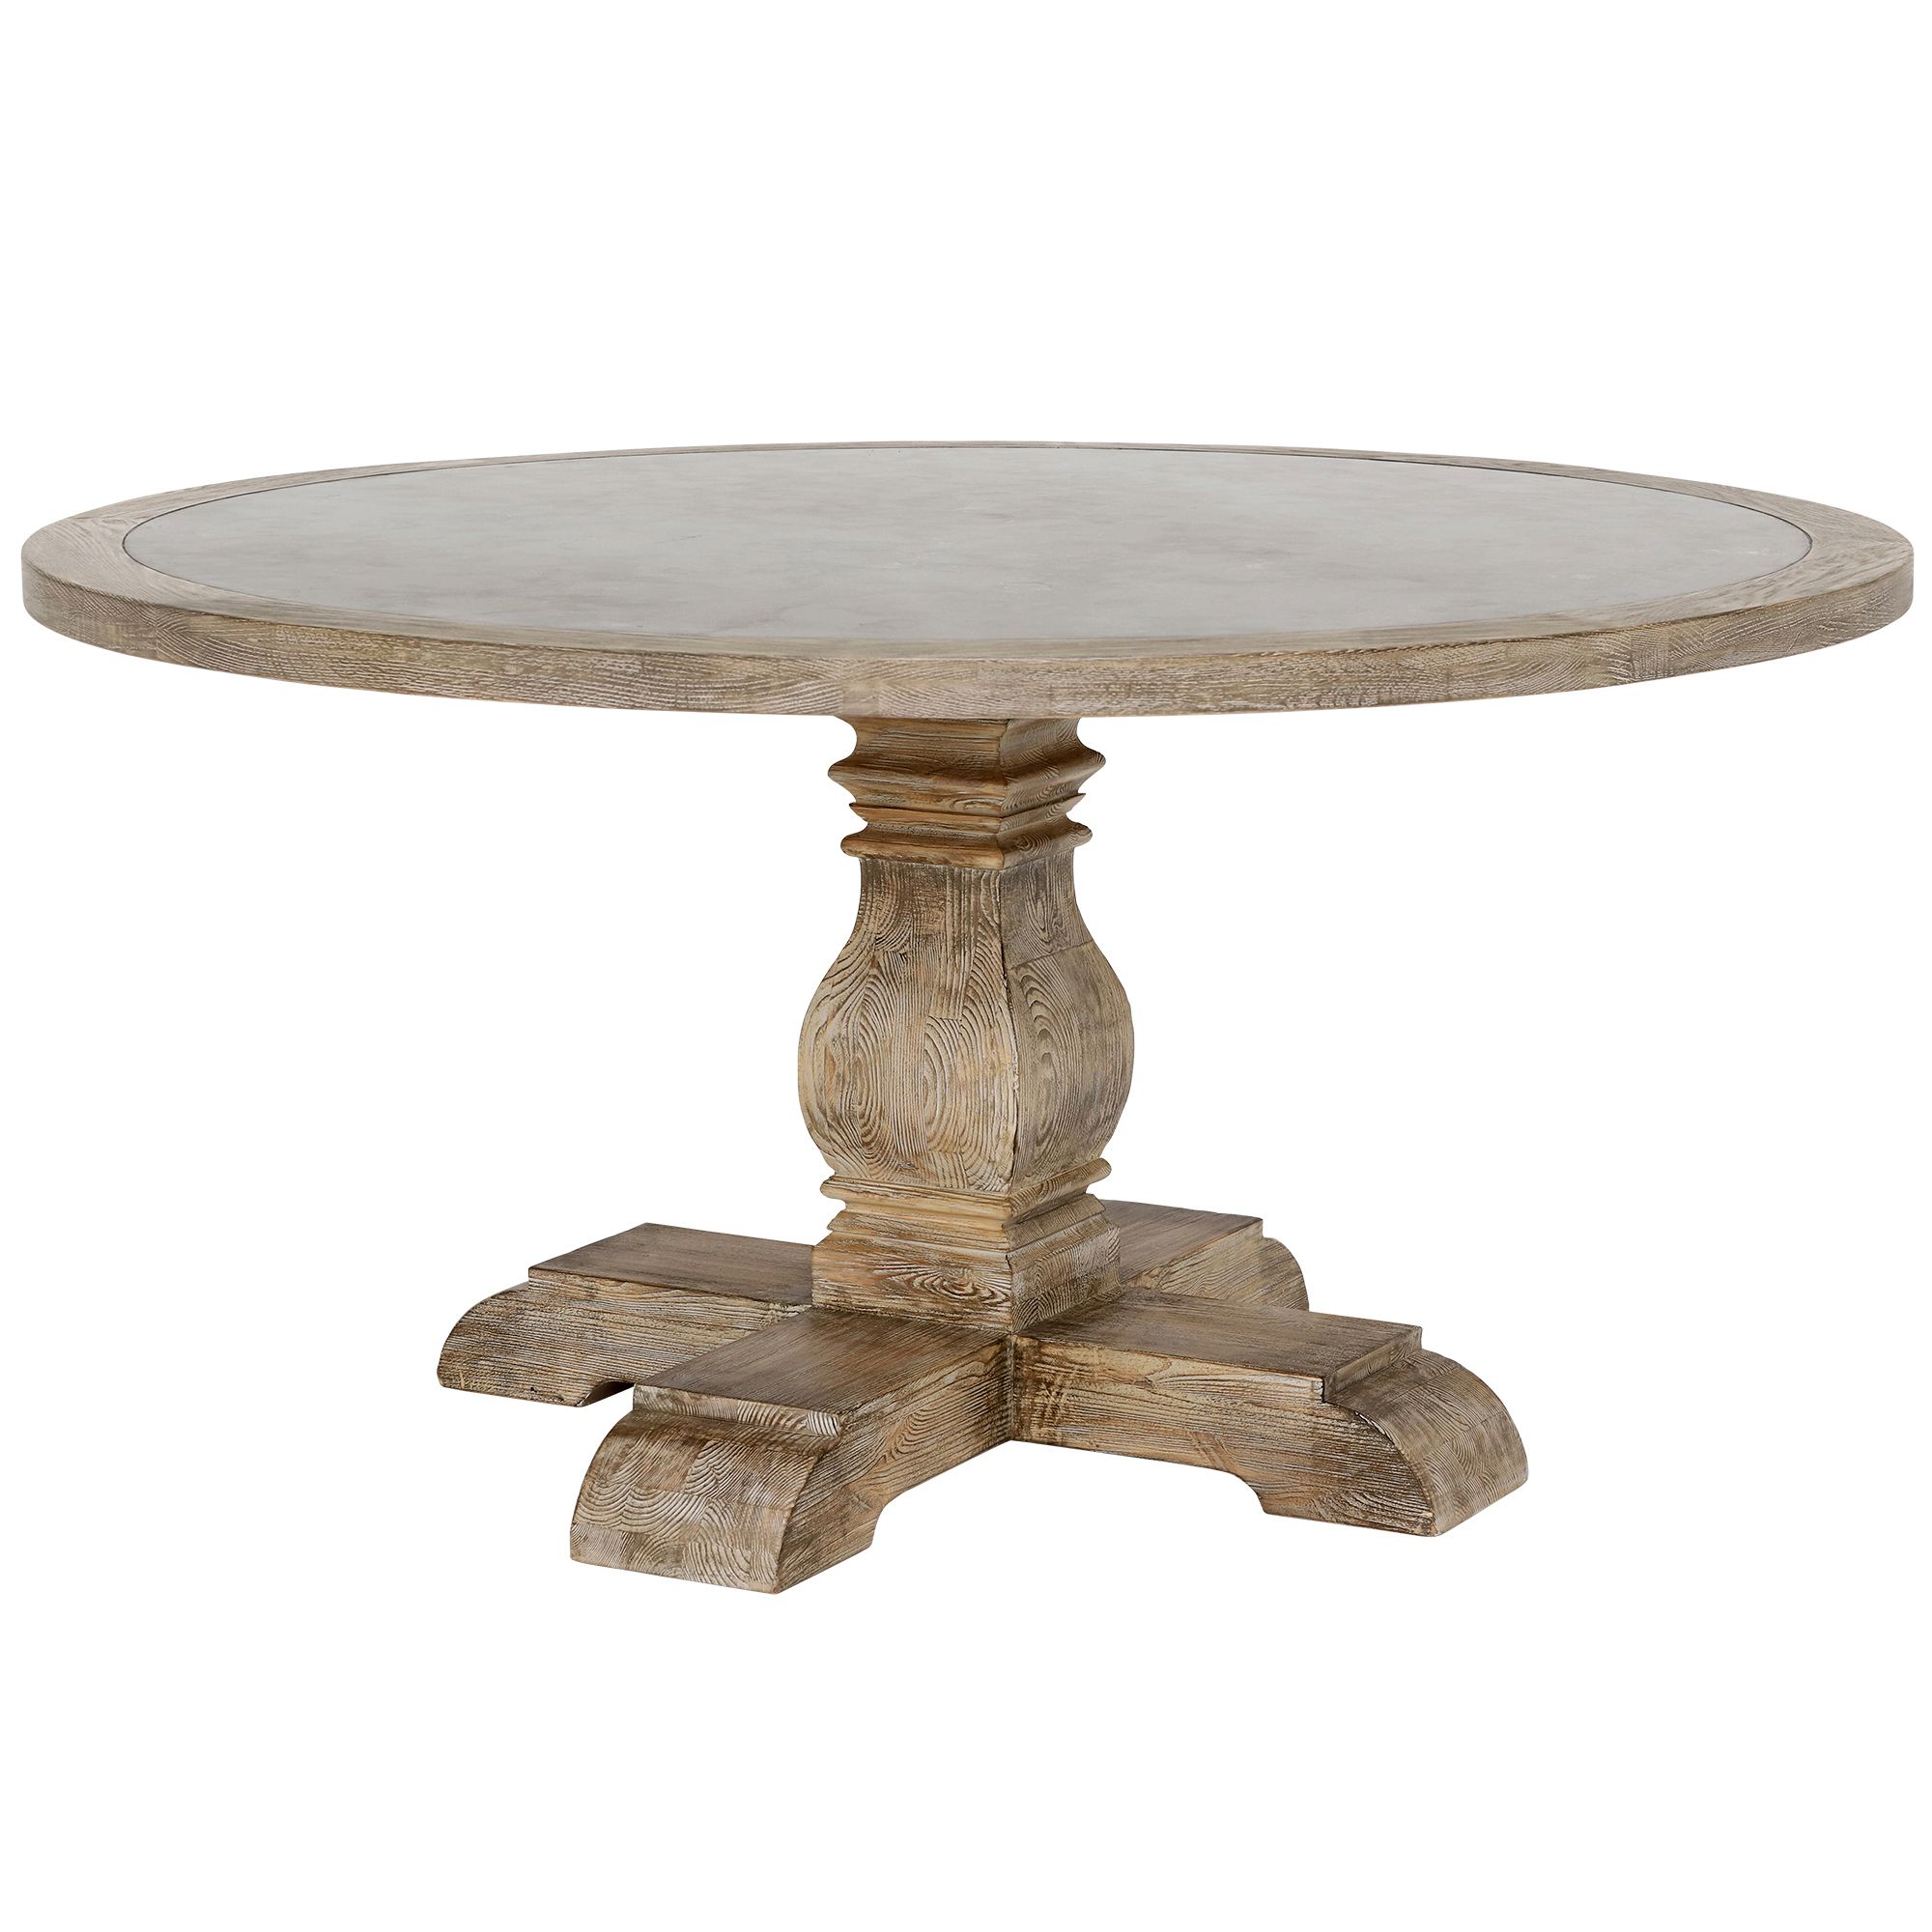 Woolton Round Dining Table, Wood & Stone – Barker & Stonehouse Inside Trendy Round Dining Tables (View 2 of 30)